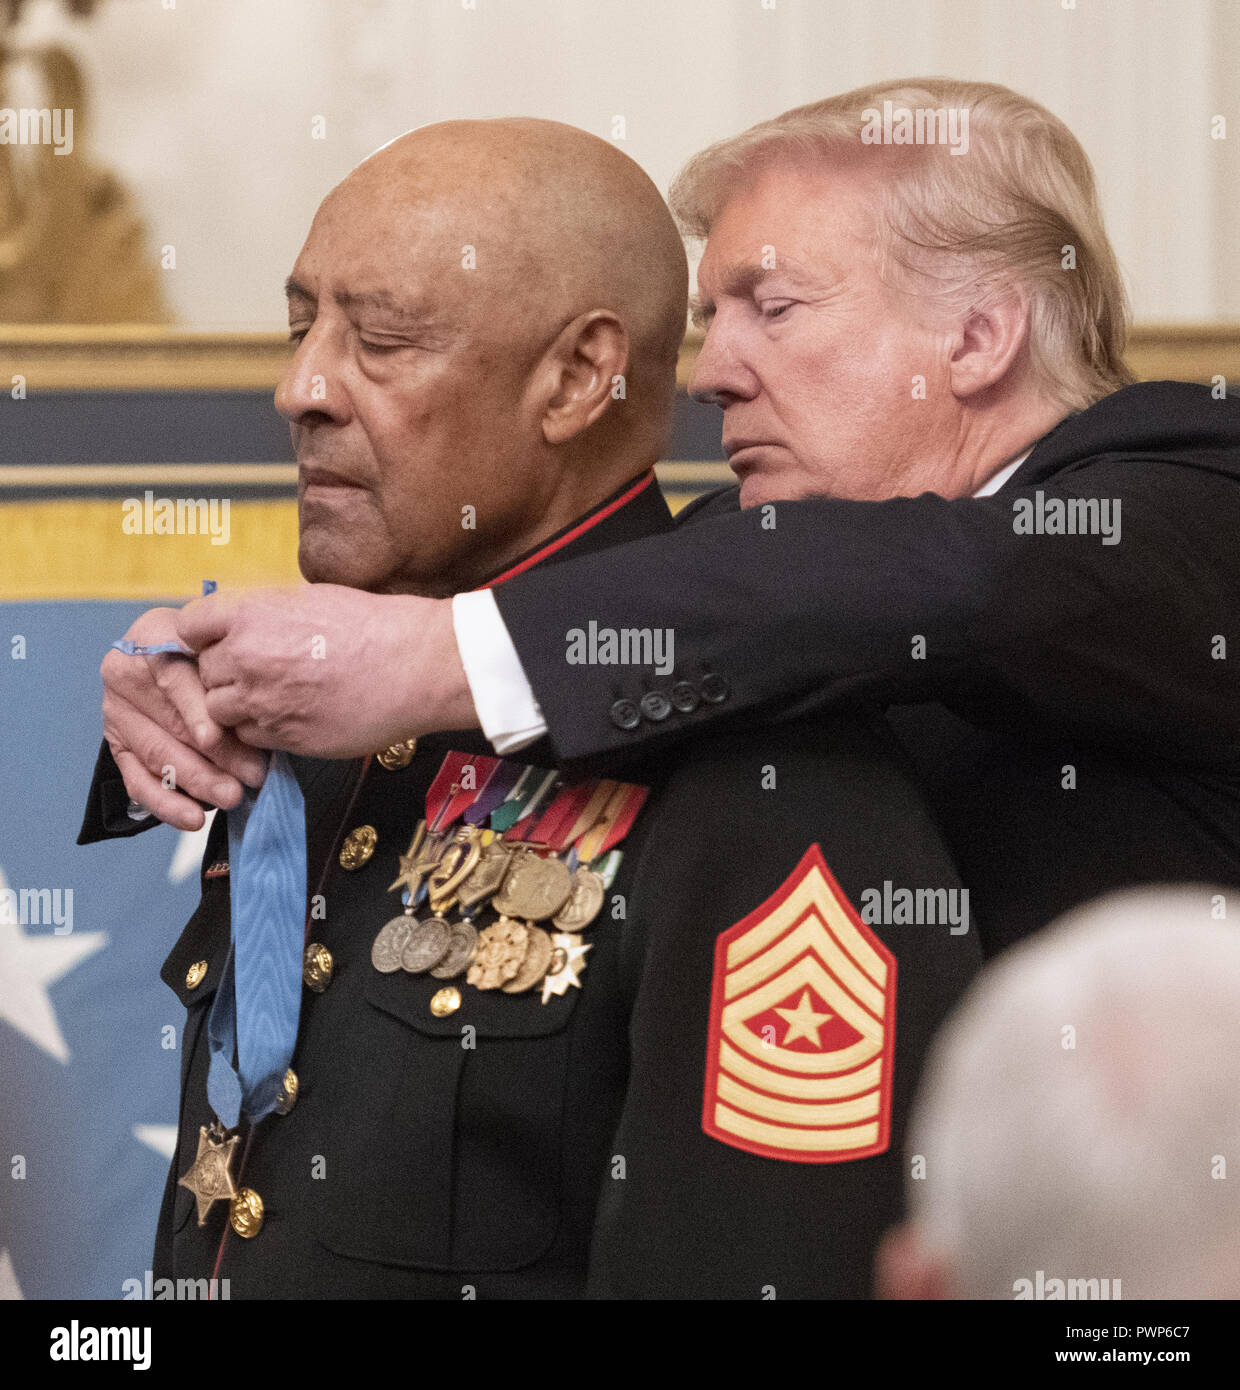 Washington, District of Columbia, USA. 17th Oct, 2018. United States President Donald J. Trump awards the Medal of Honor to Sergeant Major John L. Canley, United States Marine Corps (Retired), for conspicuous gallantry during the Vietnam War in a ceremony in the East Room of the the White House in Washington, DC on Wednesday, October 17, 2018 Credit: Ron Sachs/CNP/ZUMA Wire/Alamy Live News Stock Photo